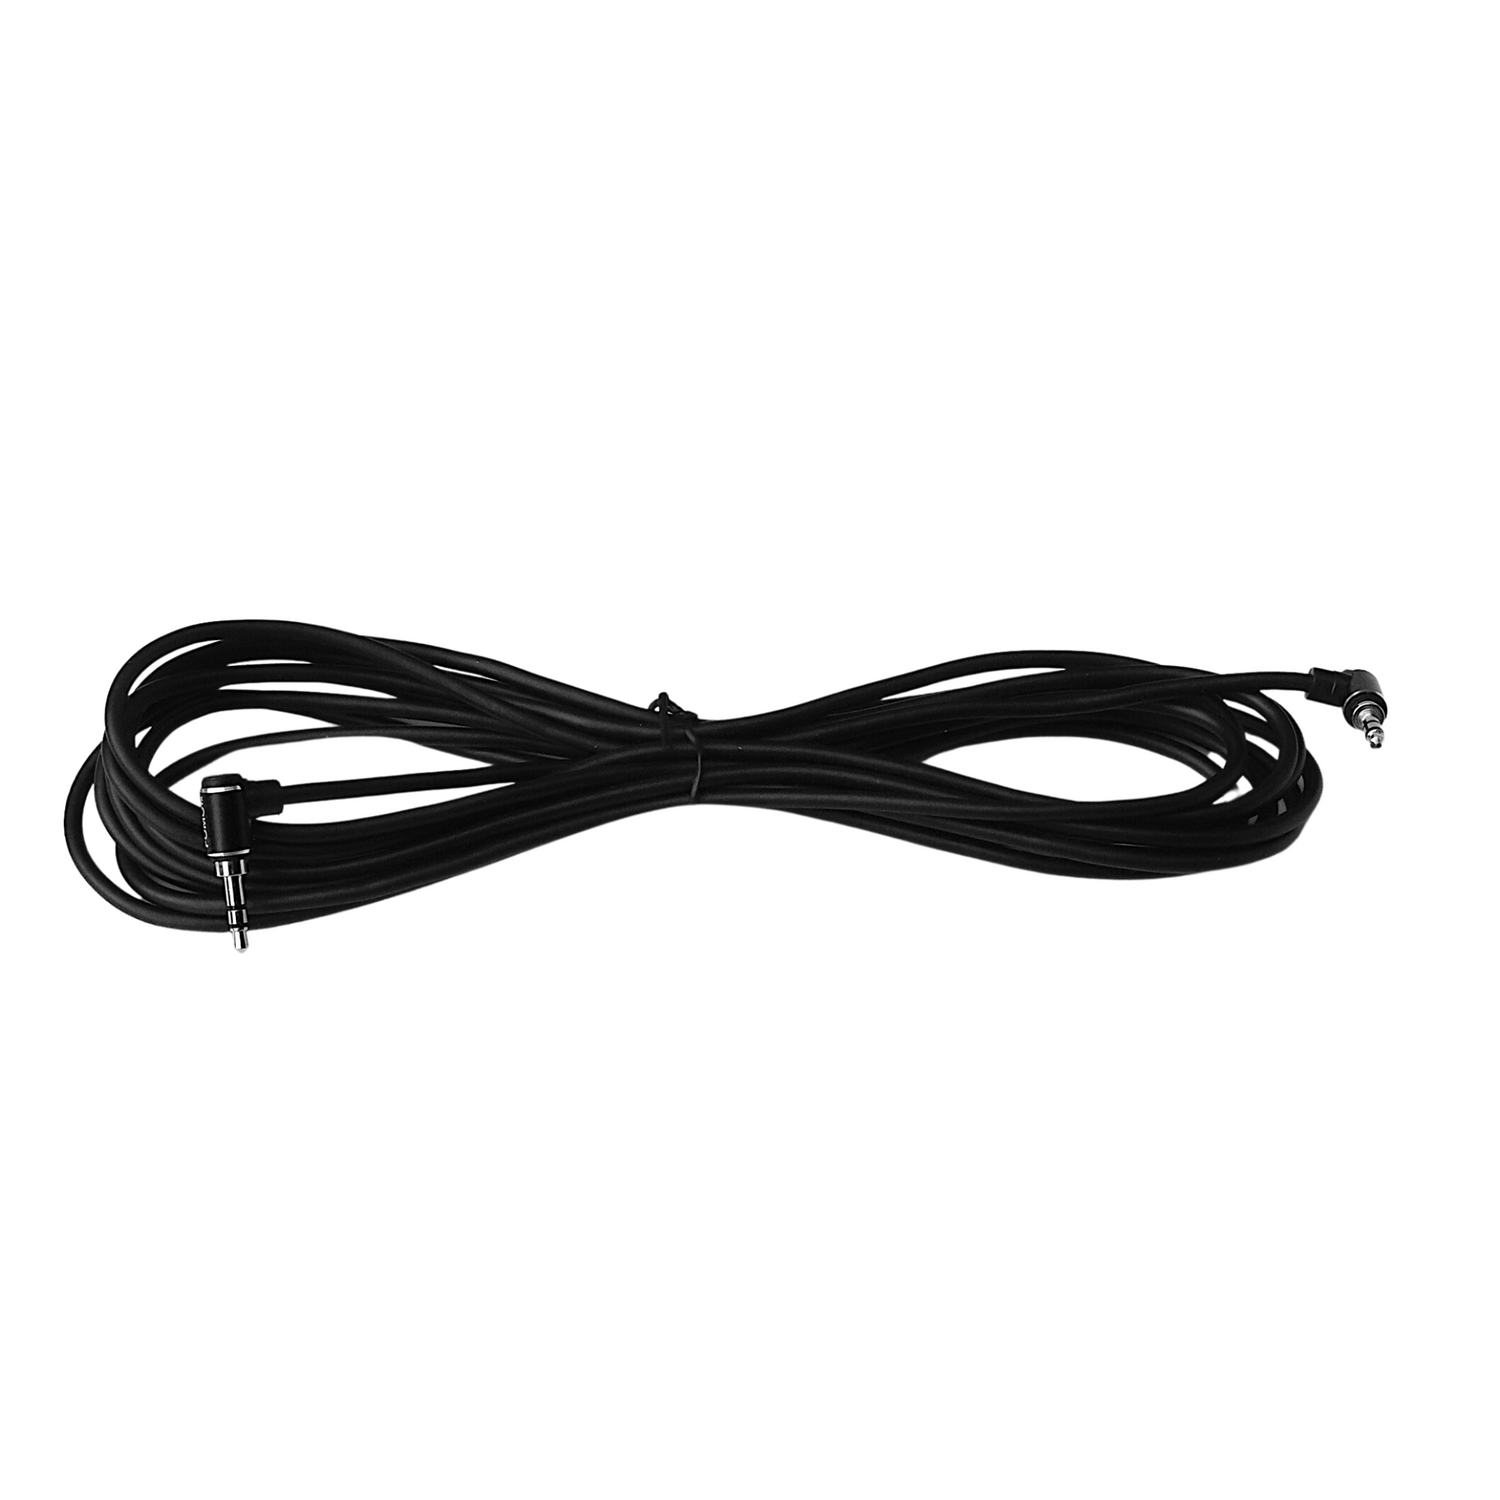 4m cable (13ft Cable - Long)